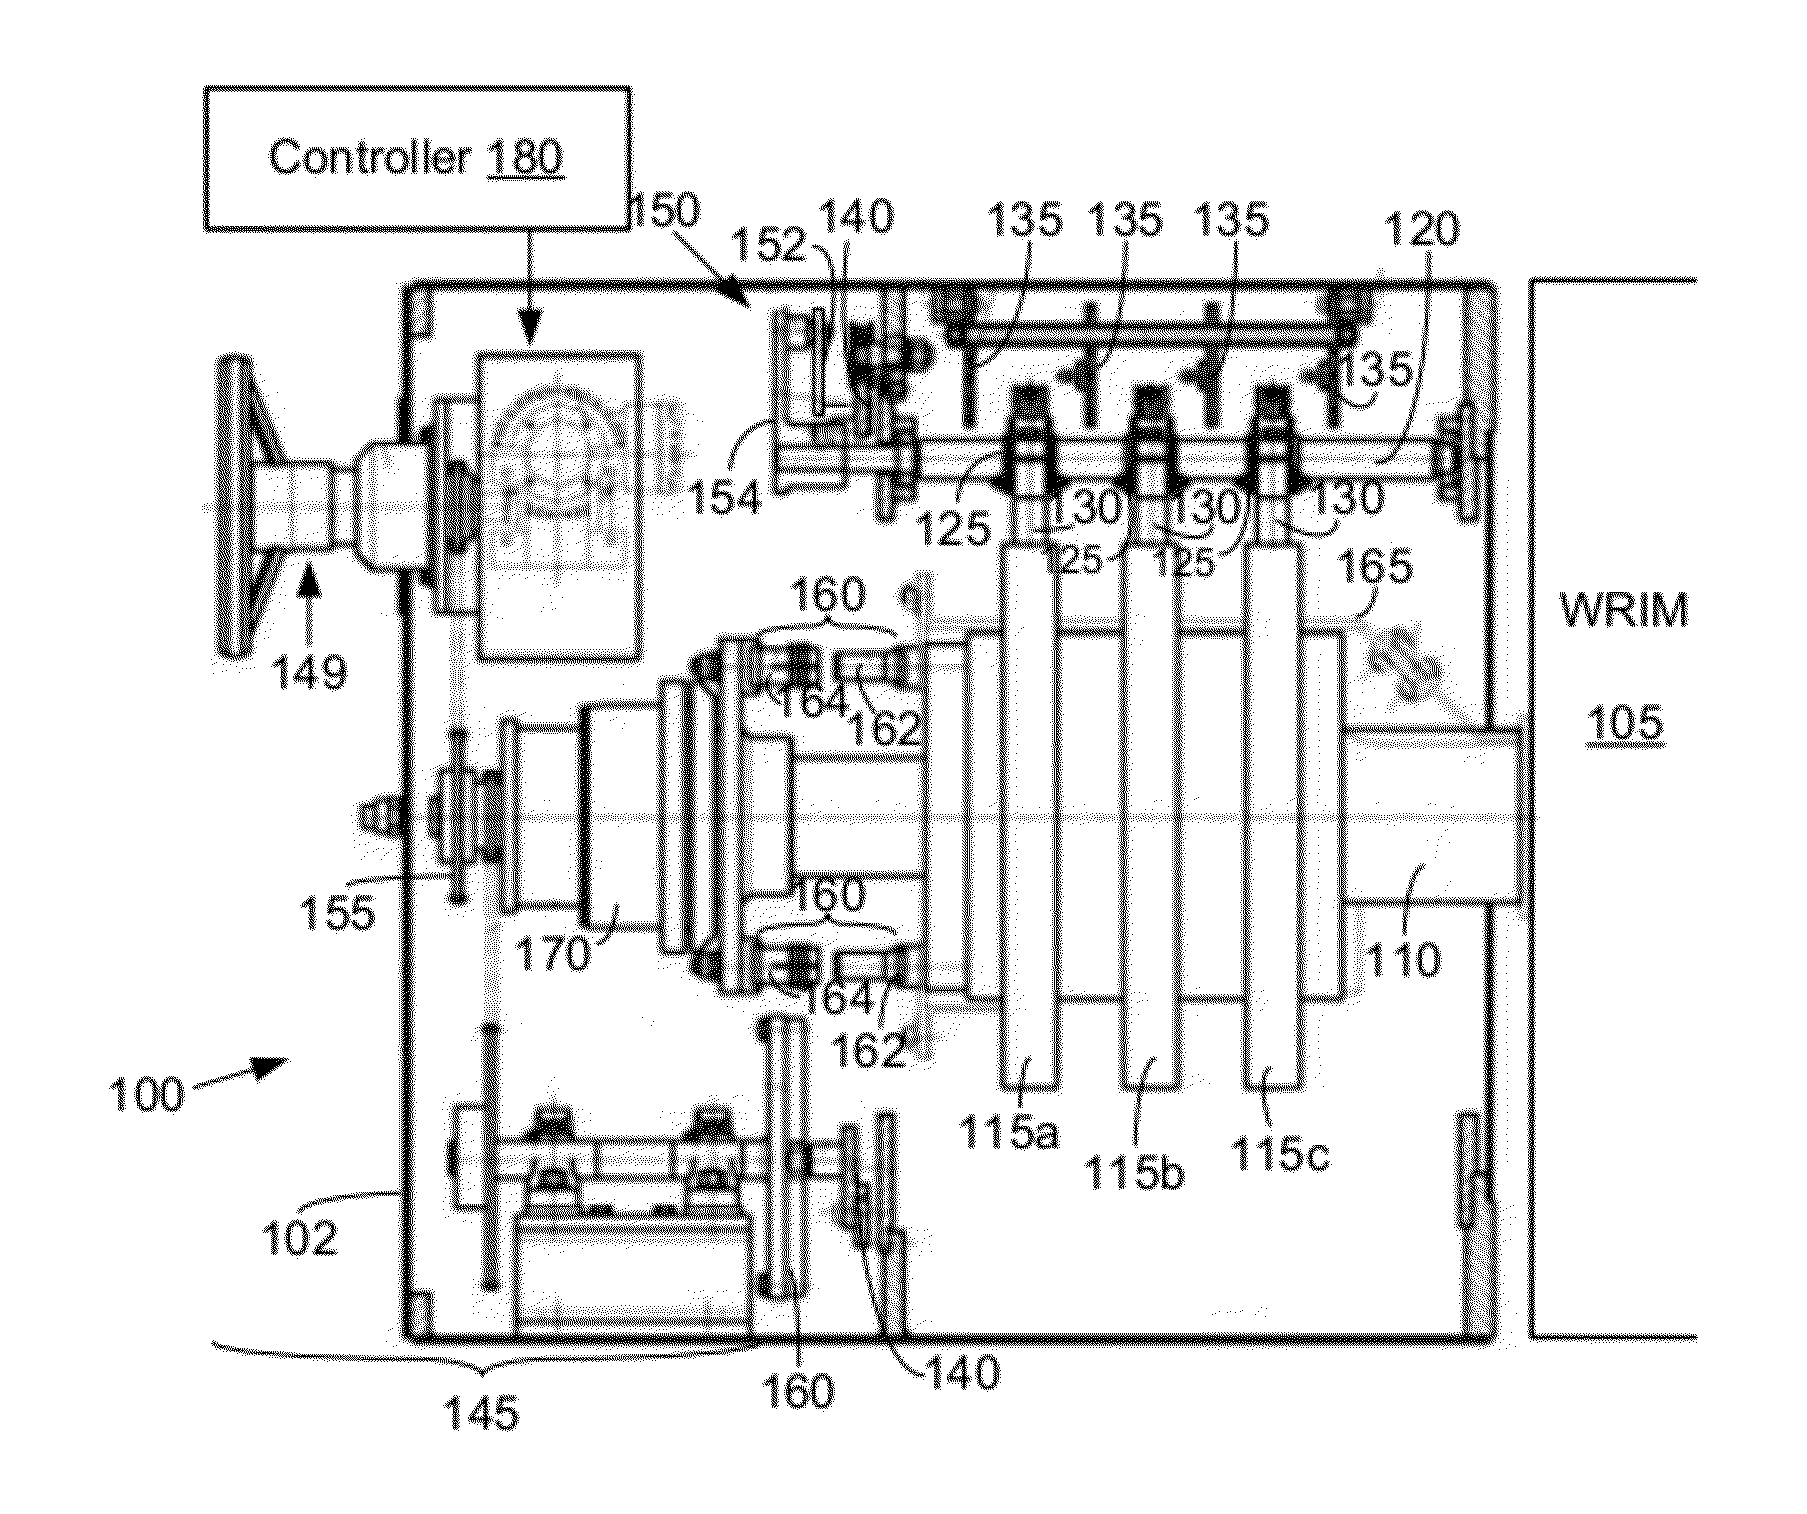 Systems, Methods, and Apparatus for Lifting Brushes of an Induction Motor